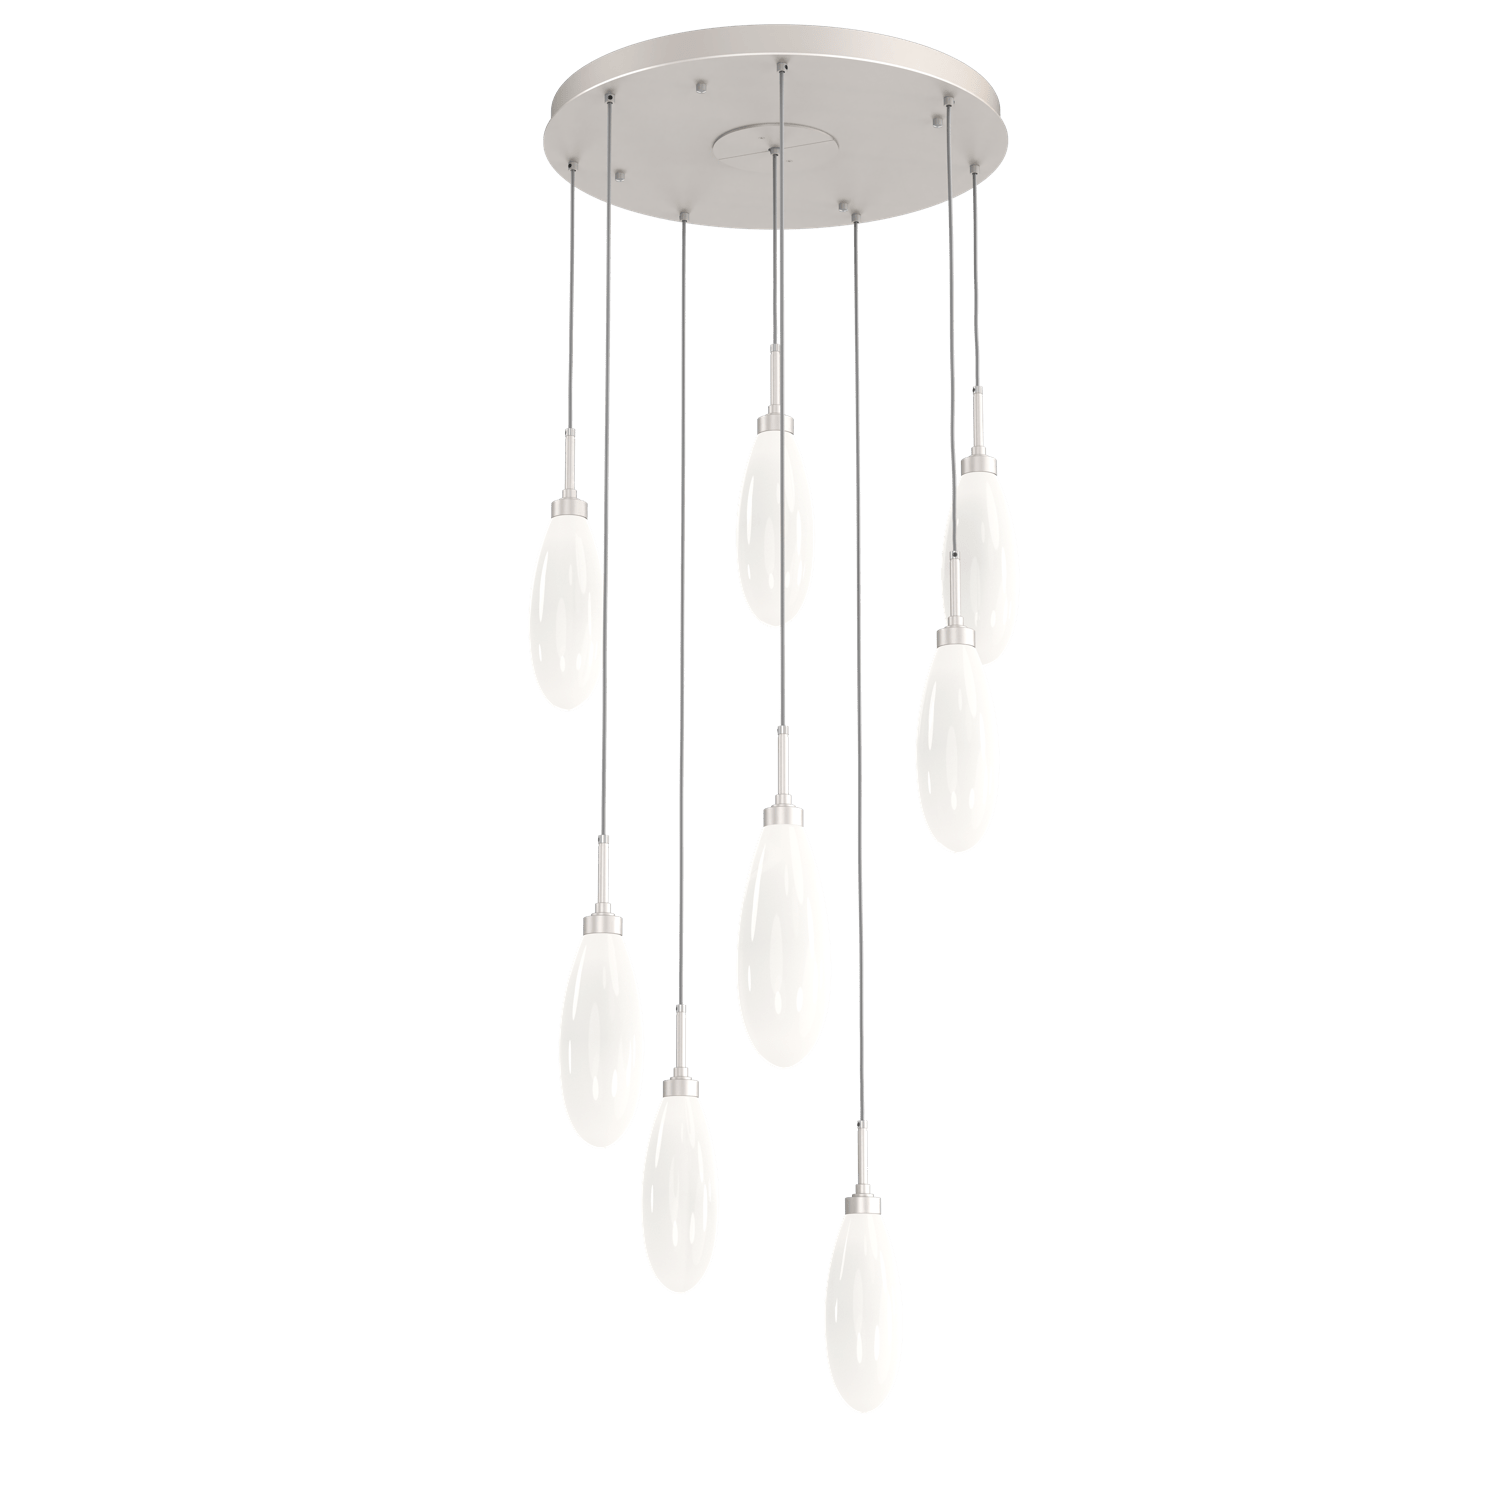 CHB0071-08-BS-WL-LL-Hammerton-Studio-Fiori-8-light-round-pendant-chandelier-with-metallic-beige-silver-finish-and-opal-white-glass-shades-and-LED-lamping